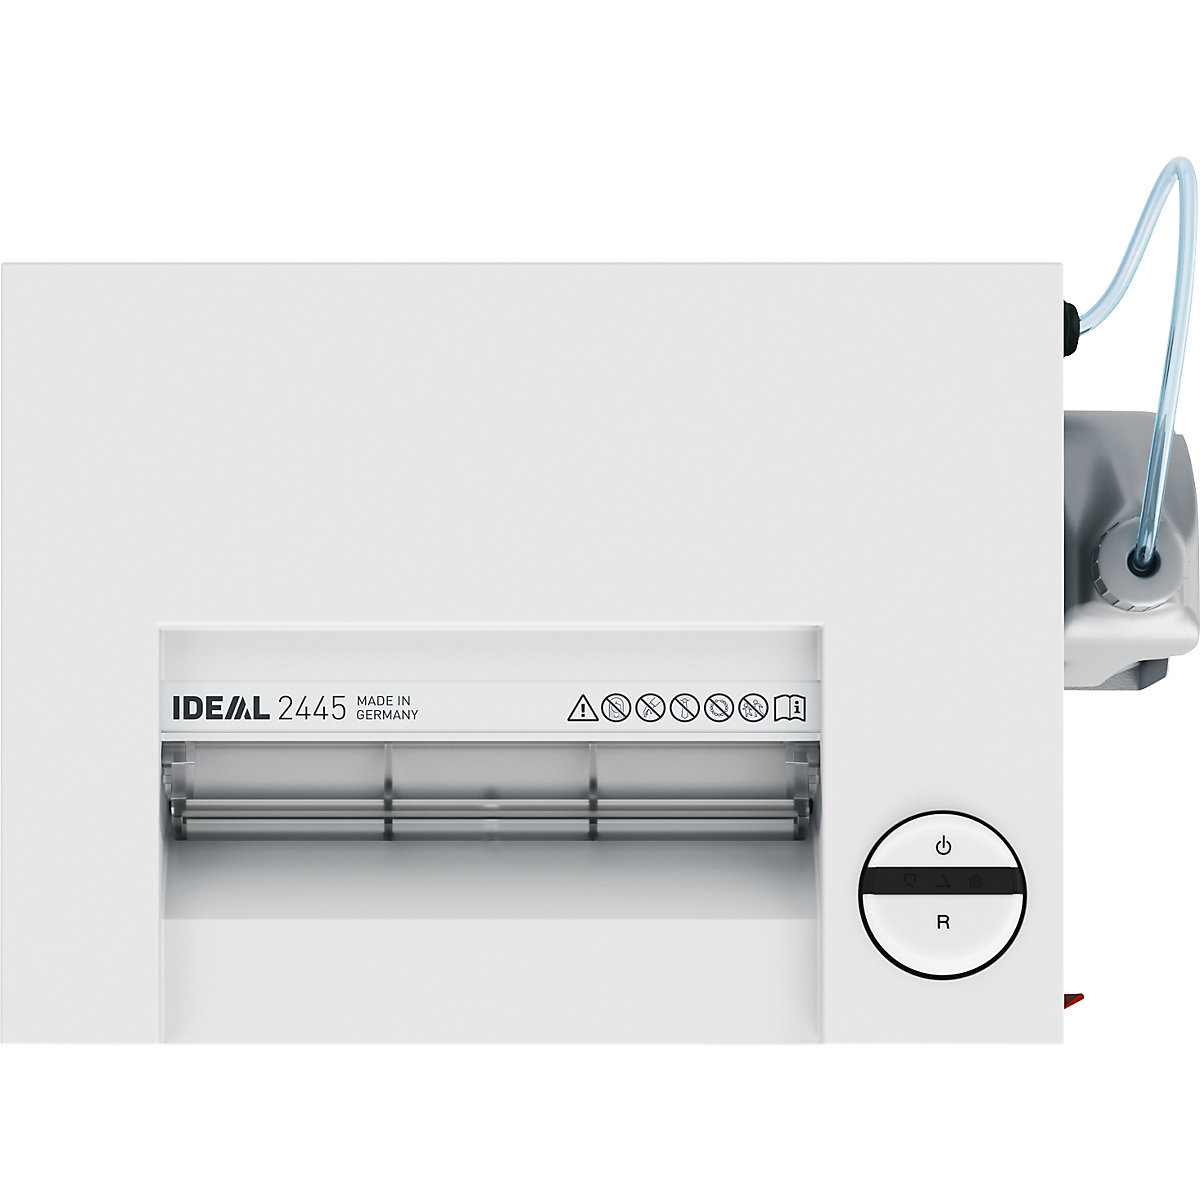 2445 CC document shredder with oiler – IDEAL (Product illustration 8)-7